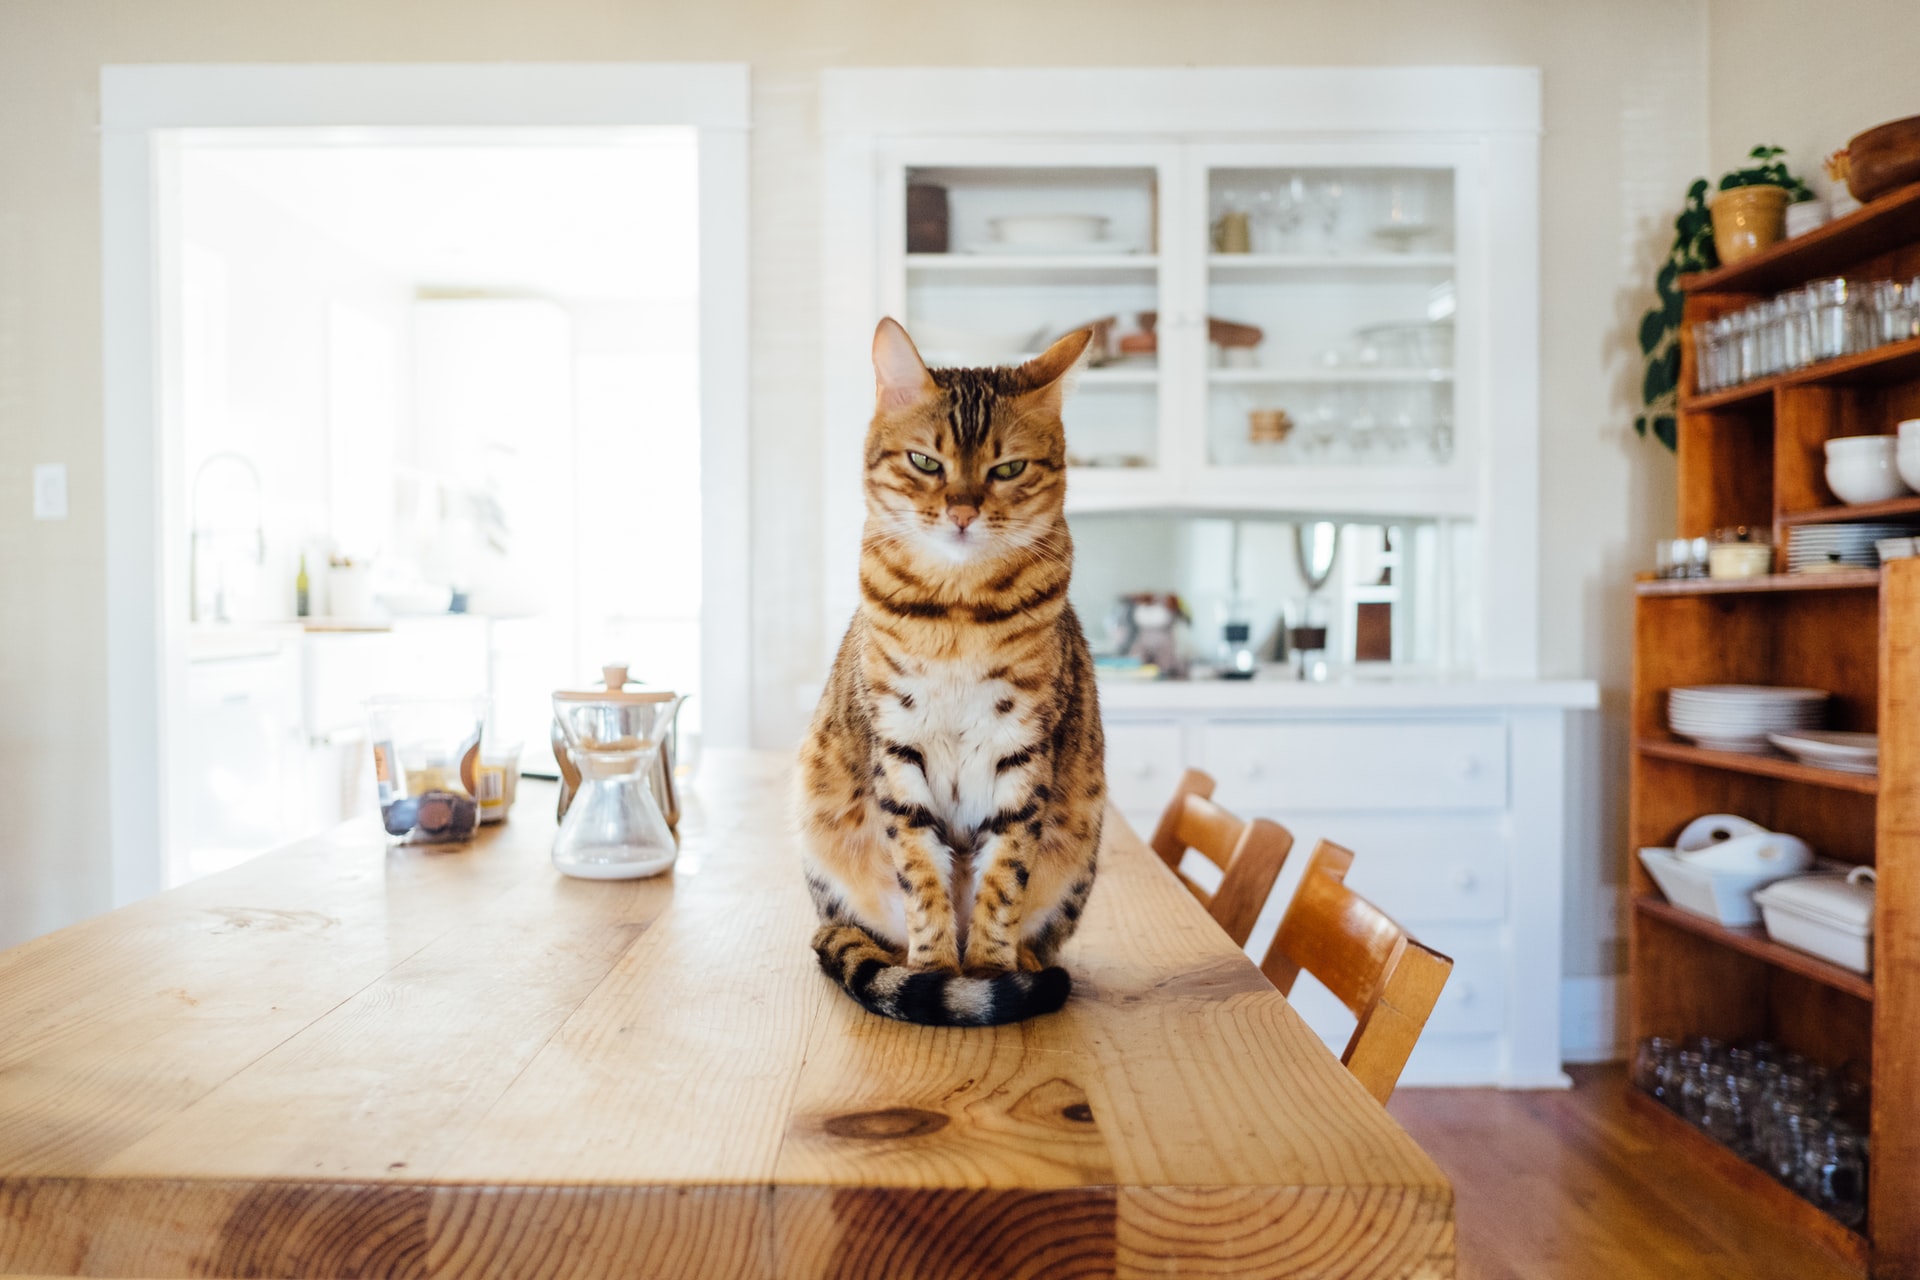 A bengal cat sitting on a kitchen table.